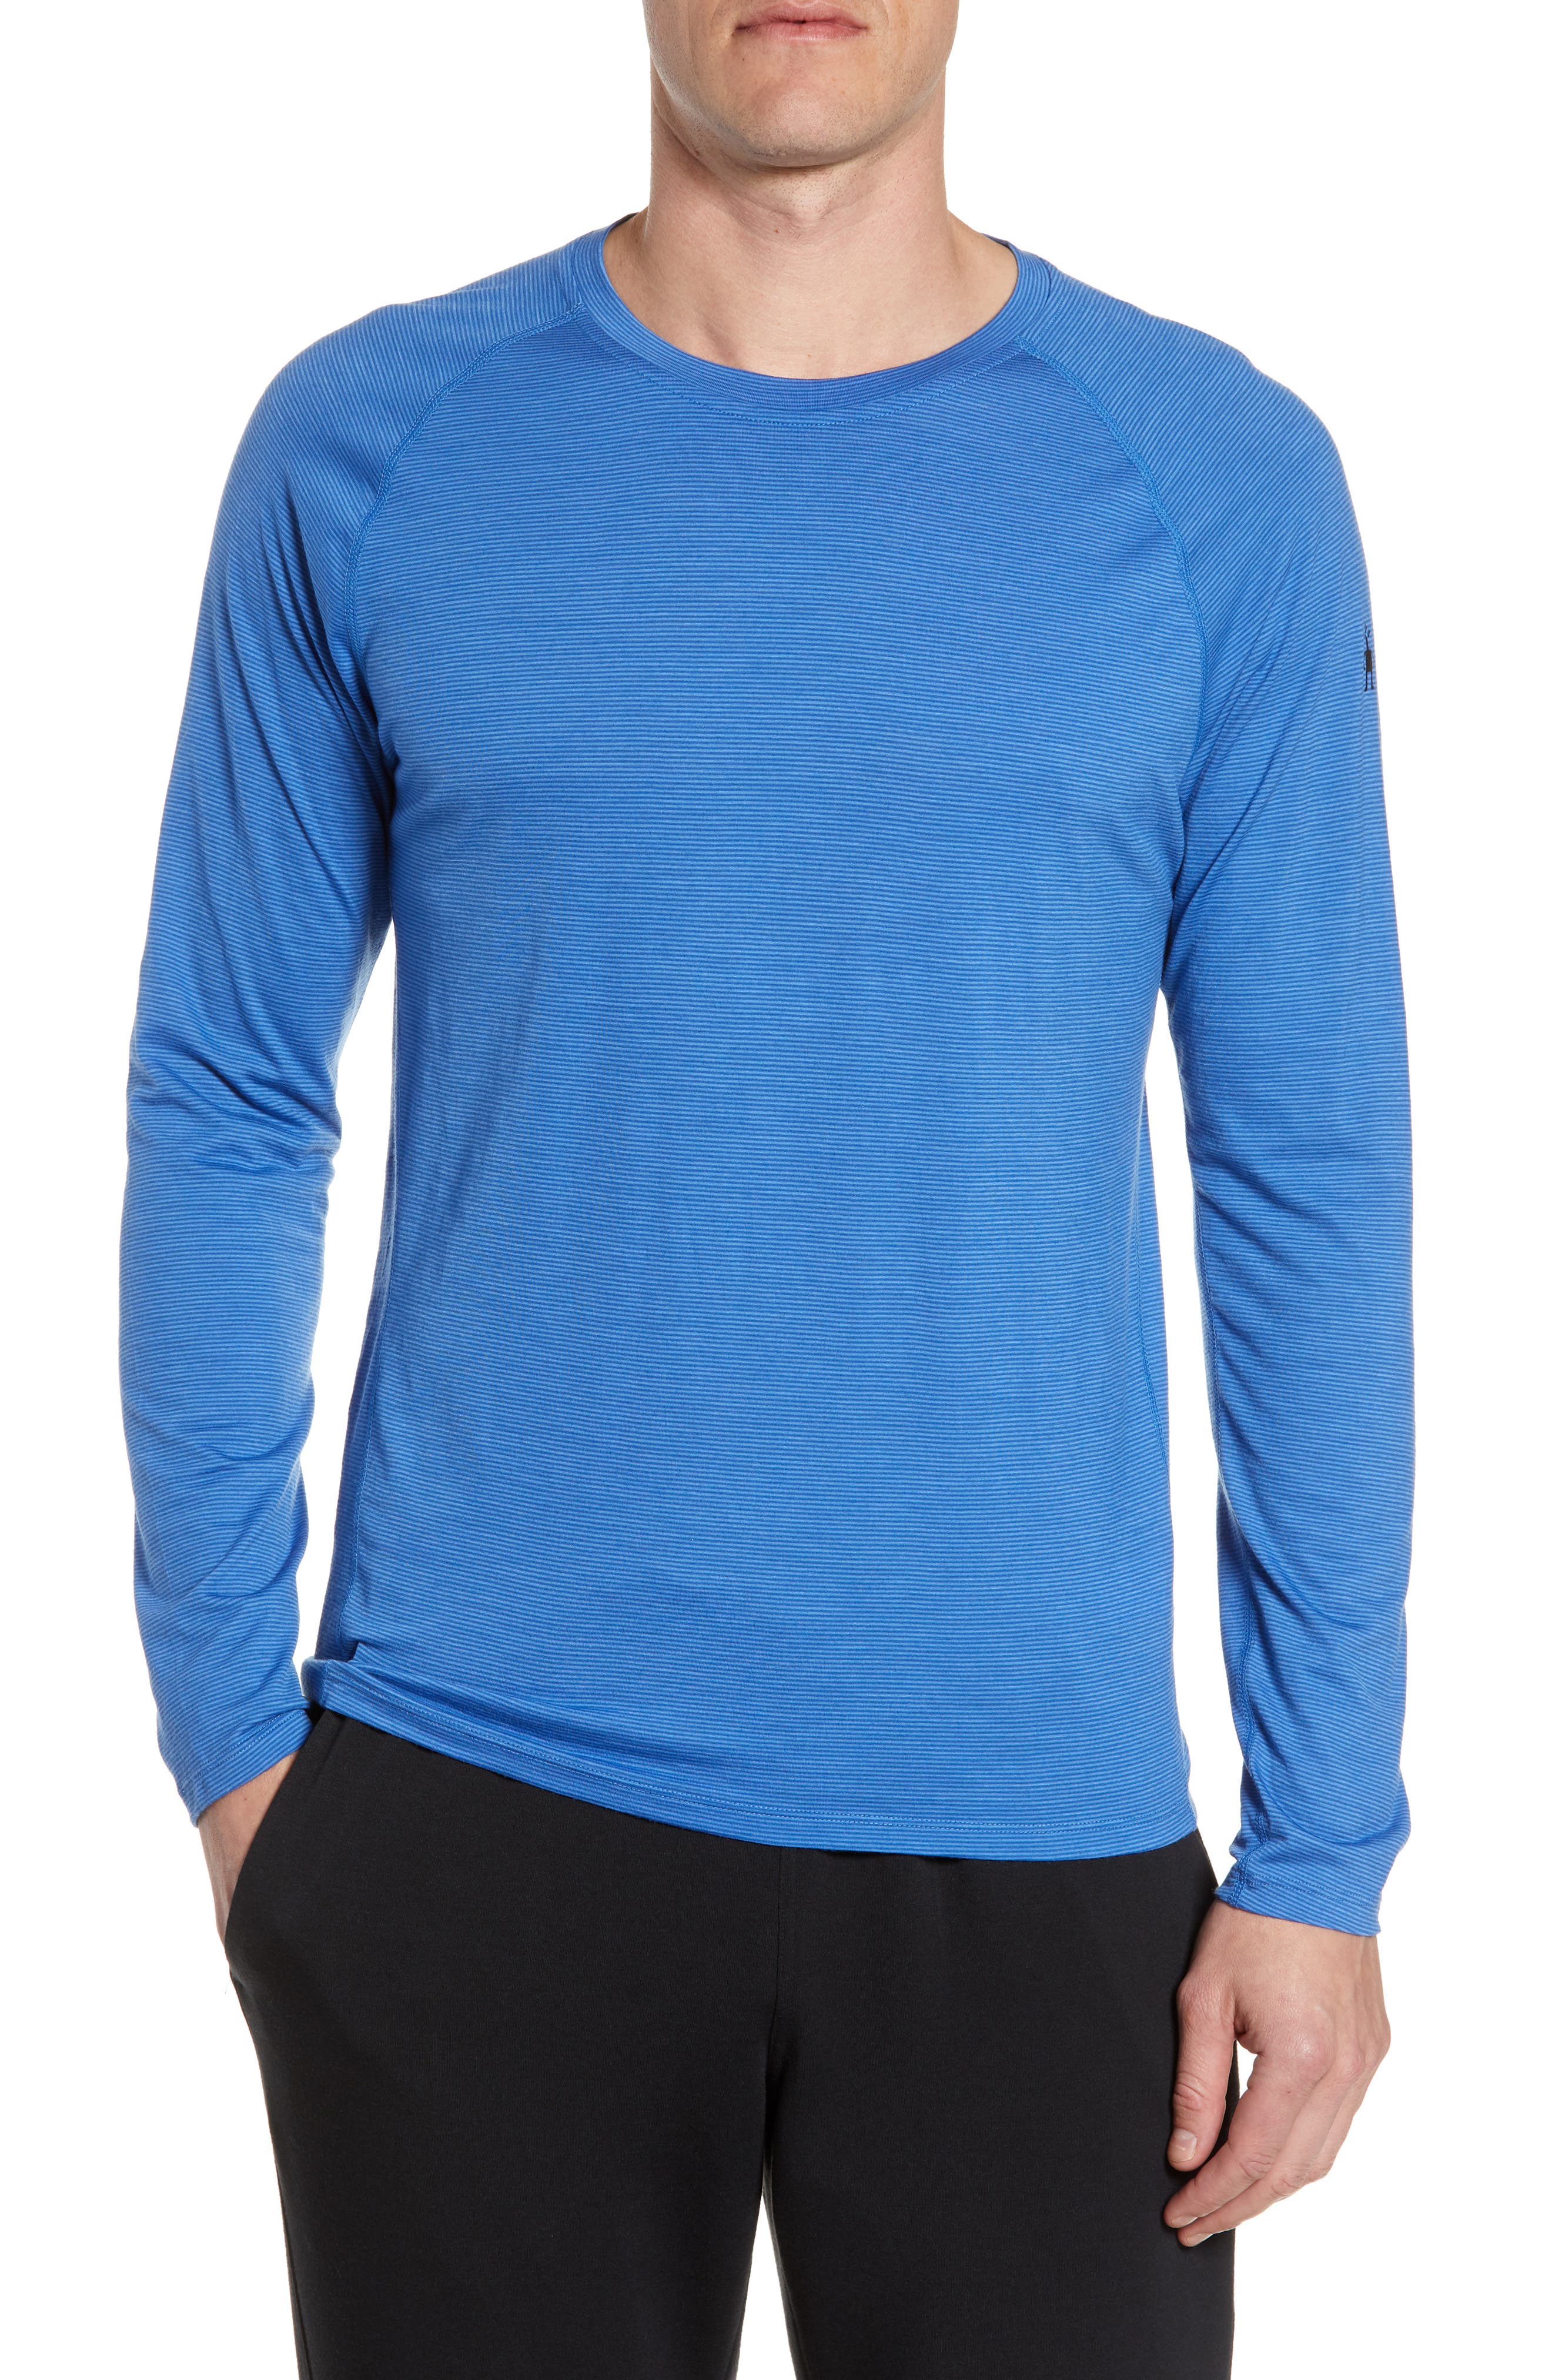 Men's Merino Tops Active, Gym, Sports, Fitness, Workout Clothing